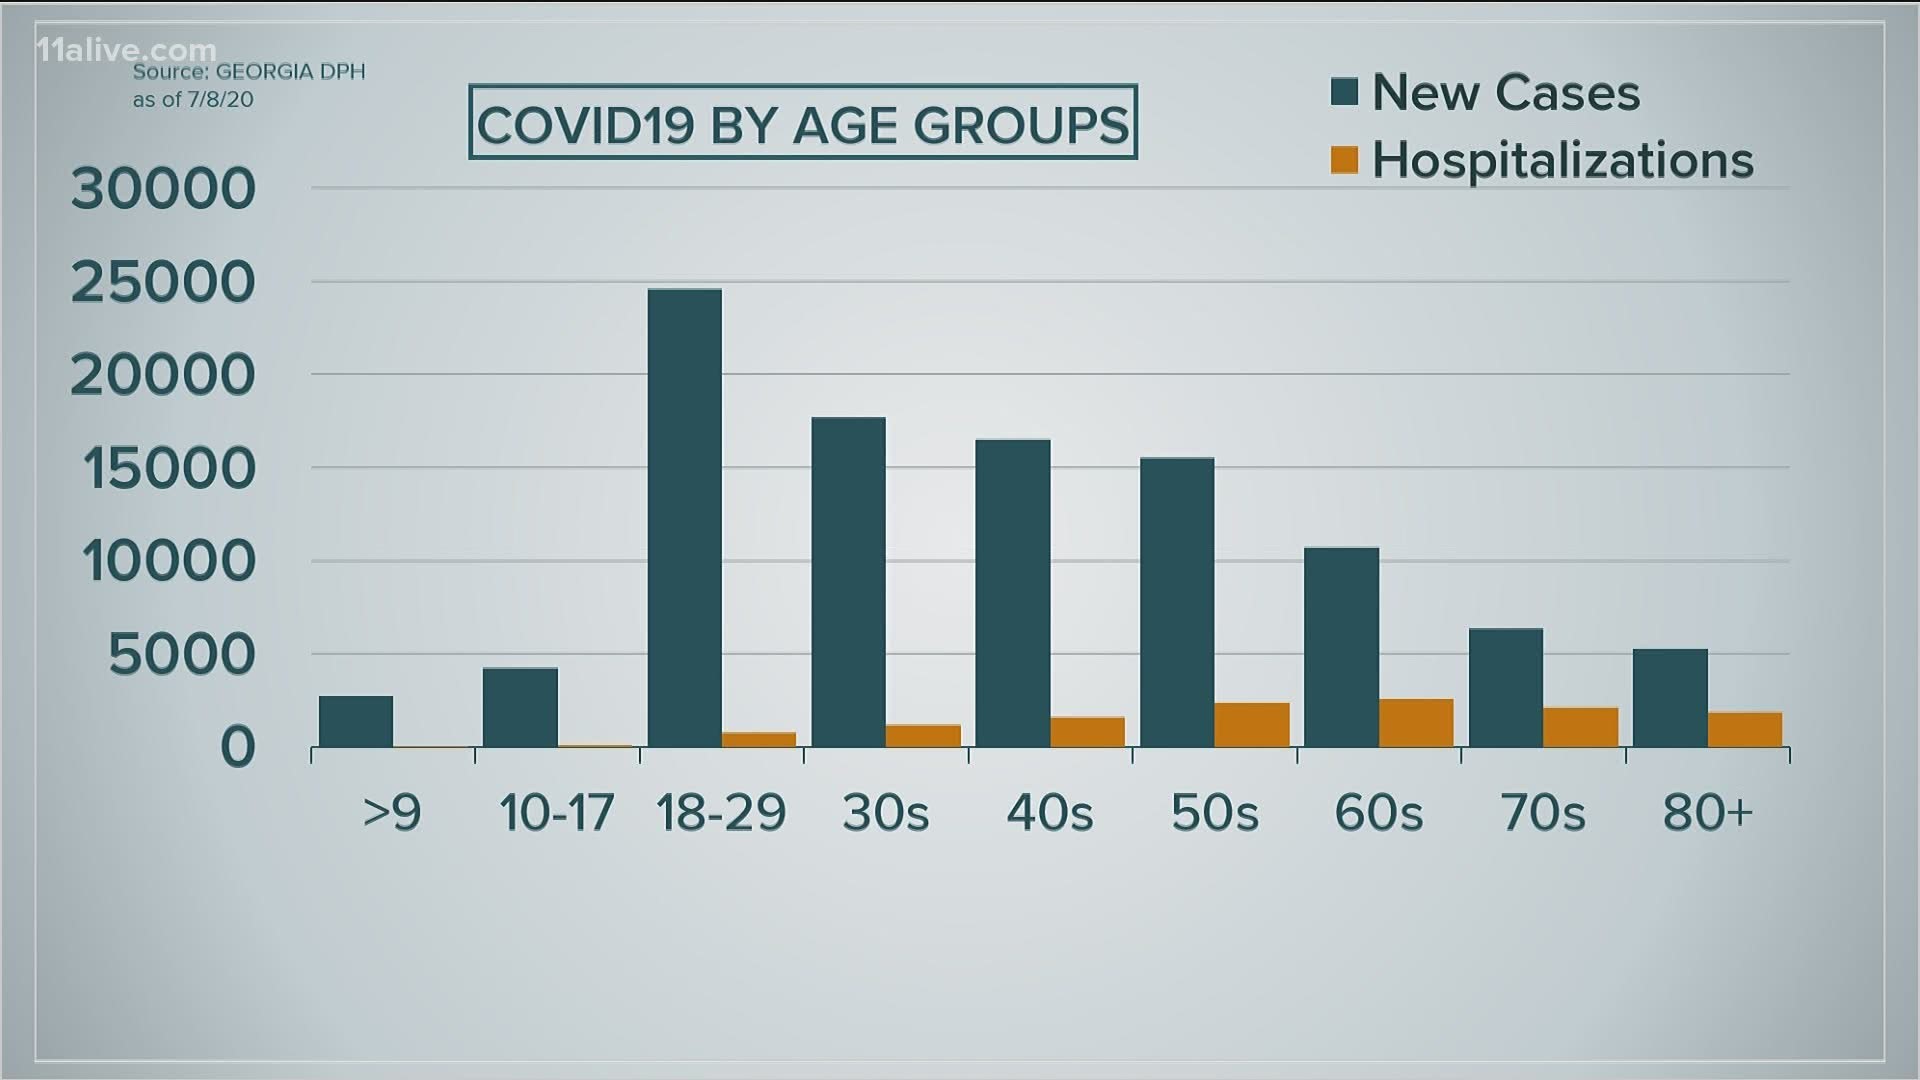 The age group seeking the most medical attention are those in their 60s.